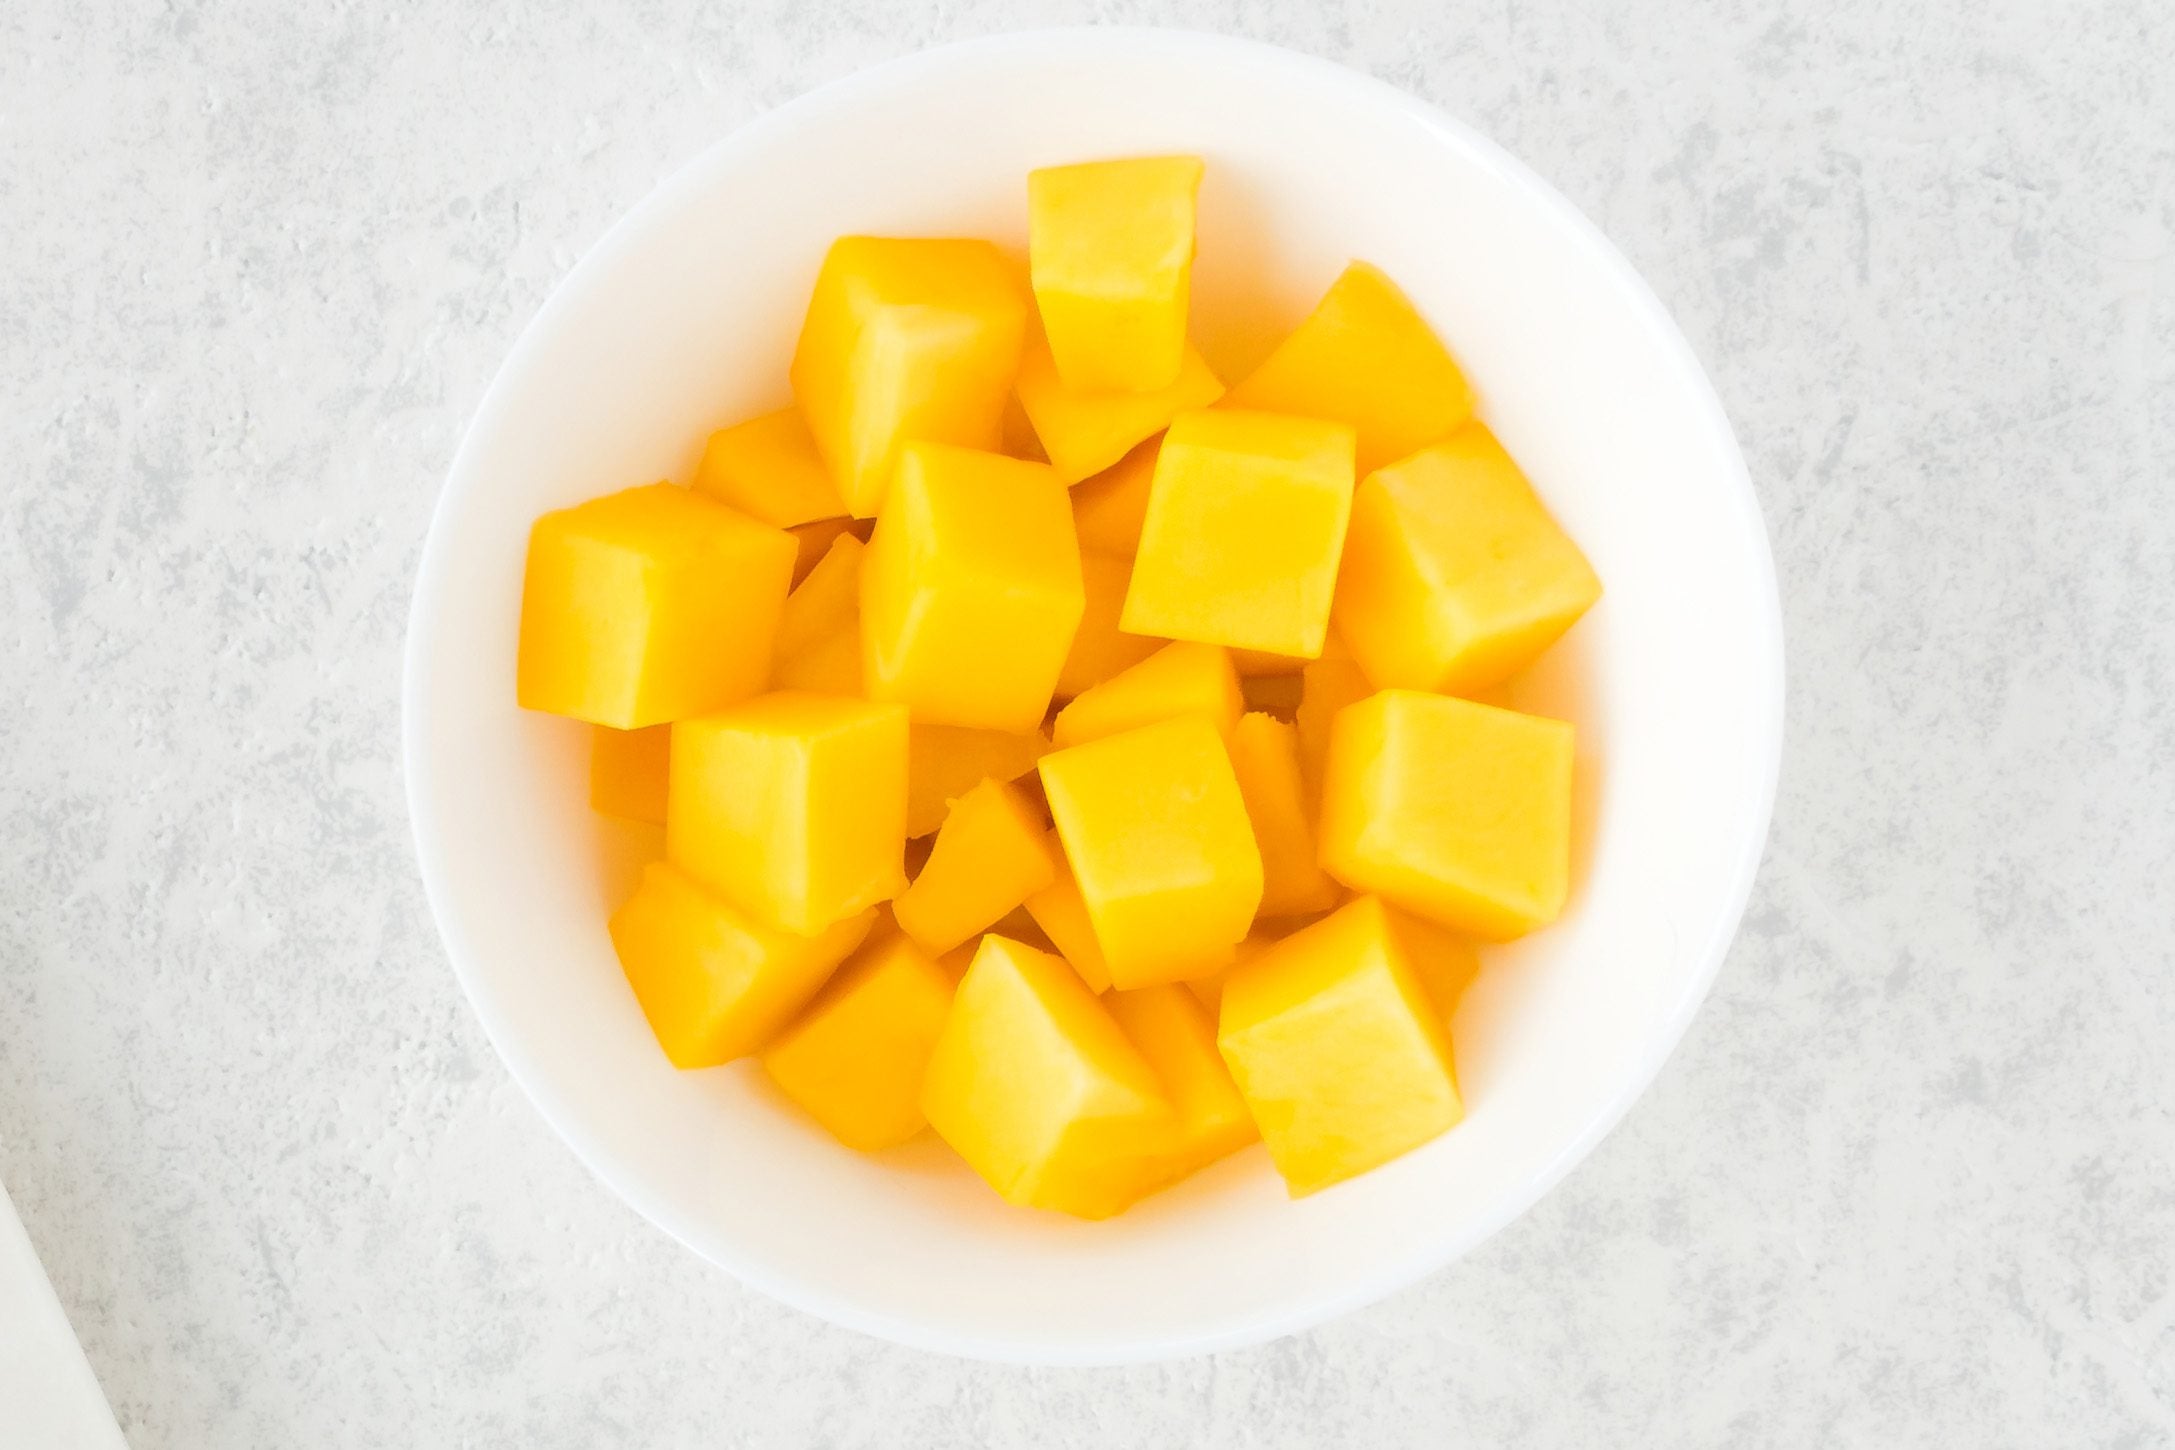 Top view of mango cubes in white bowl.